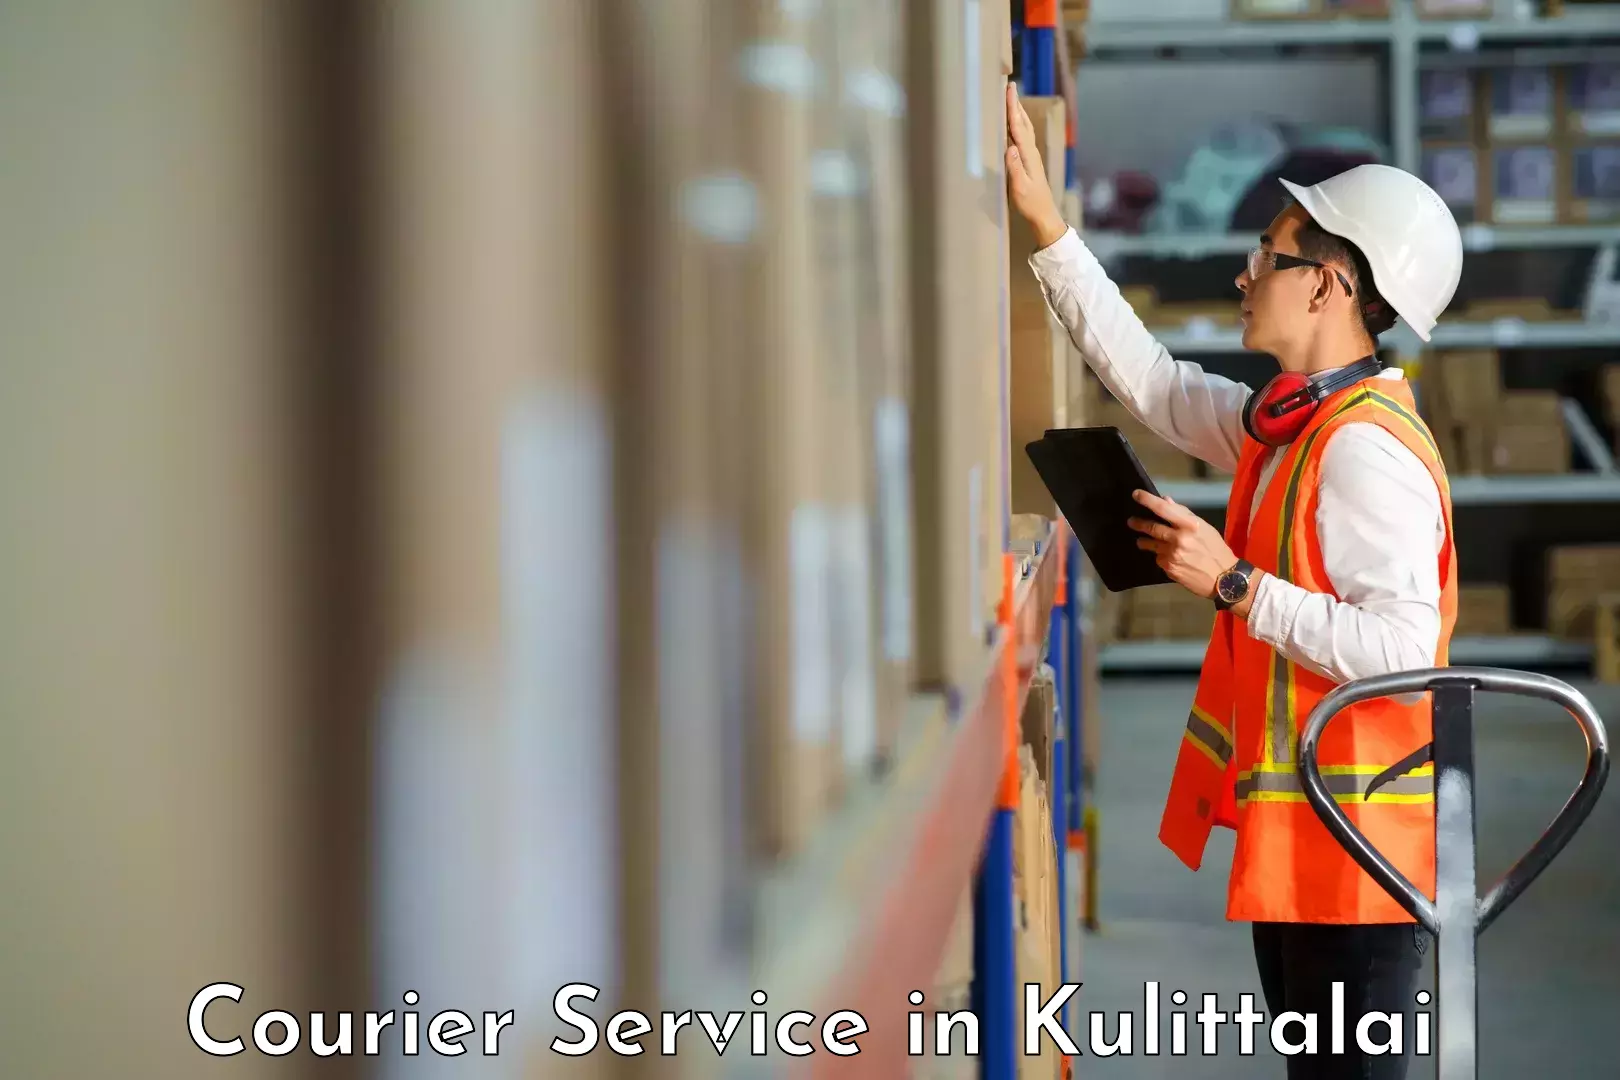 Round-the-clock parcel delivery in Kulittalai